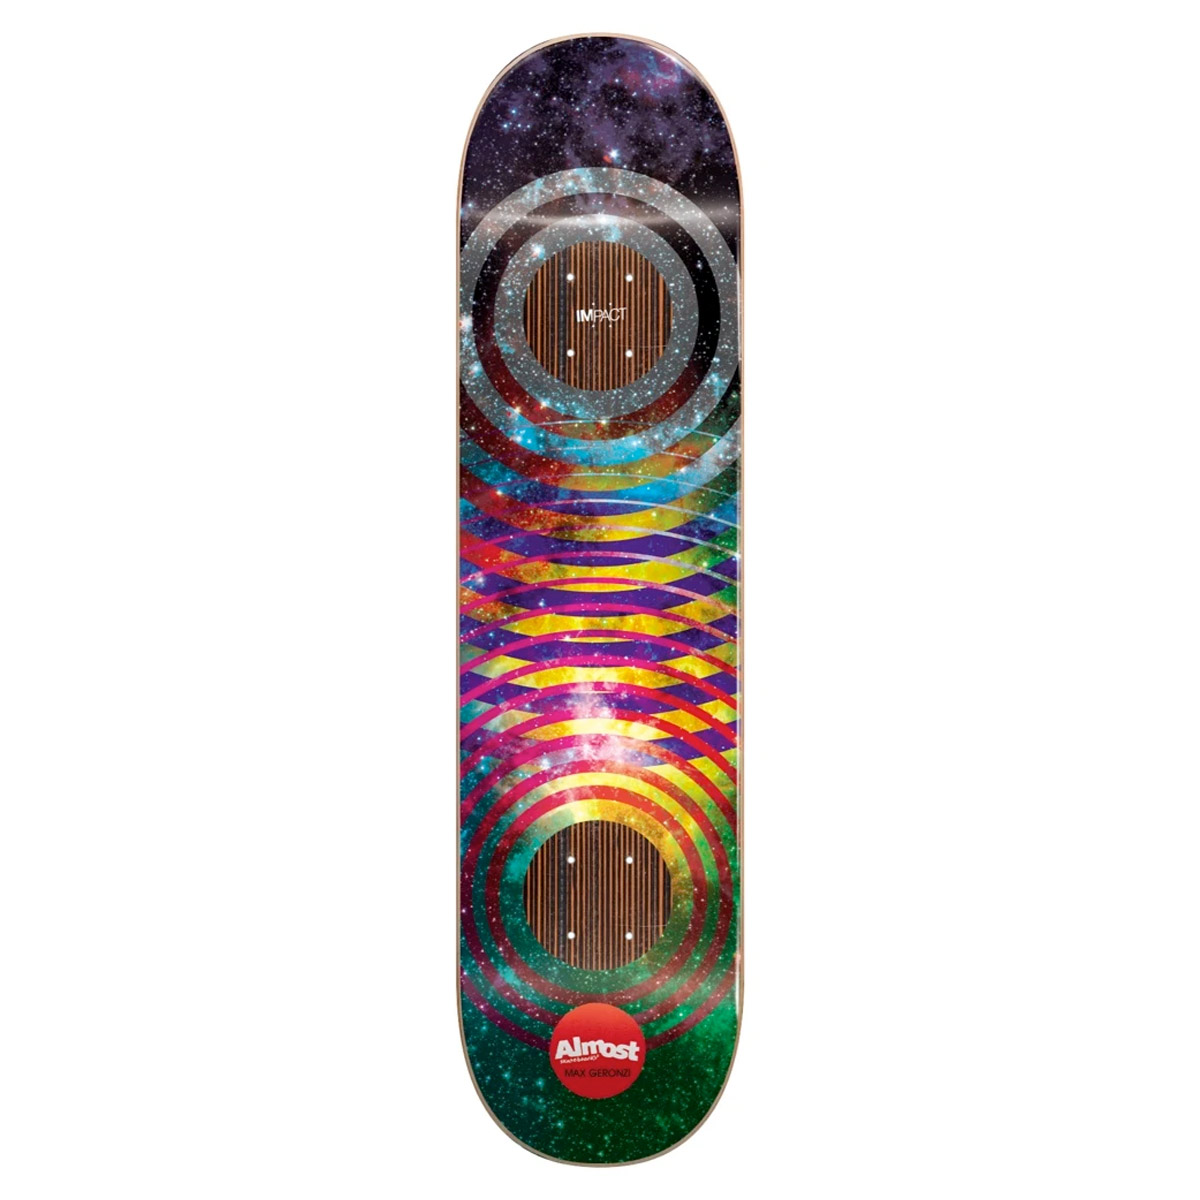 Almost Skateboard Deck Max Space Rings Impact 8.0"